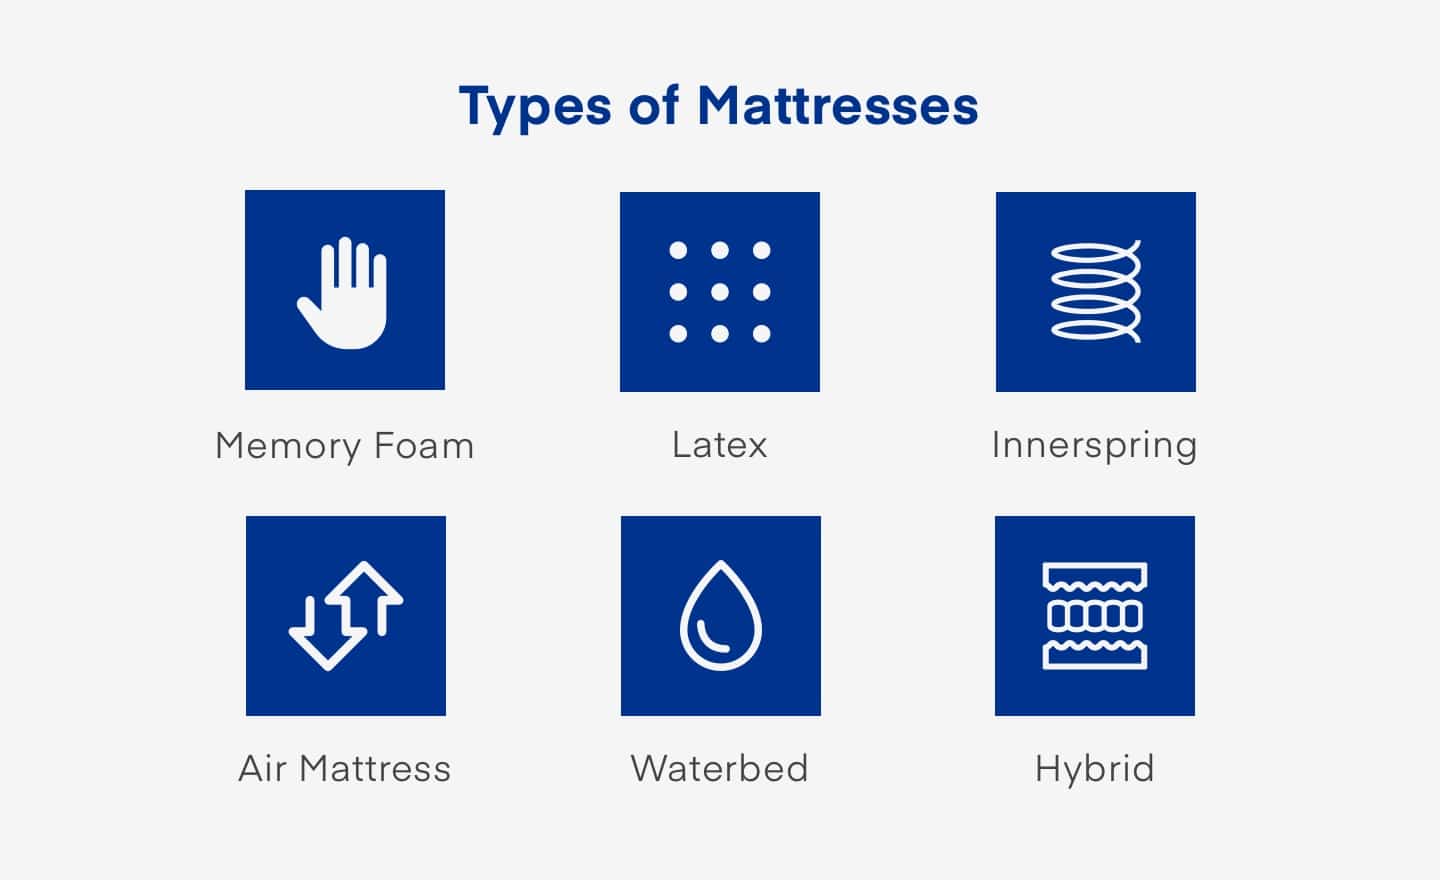 different types of mattresses; memory foam, latex, innerspring, airbed, waterbed and hybrid